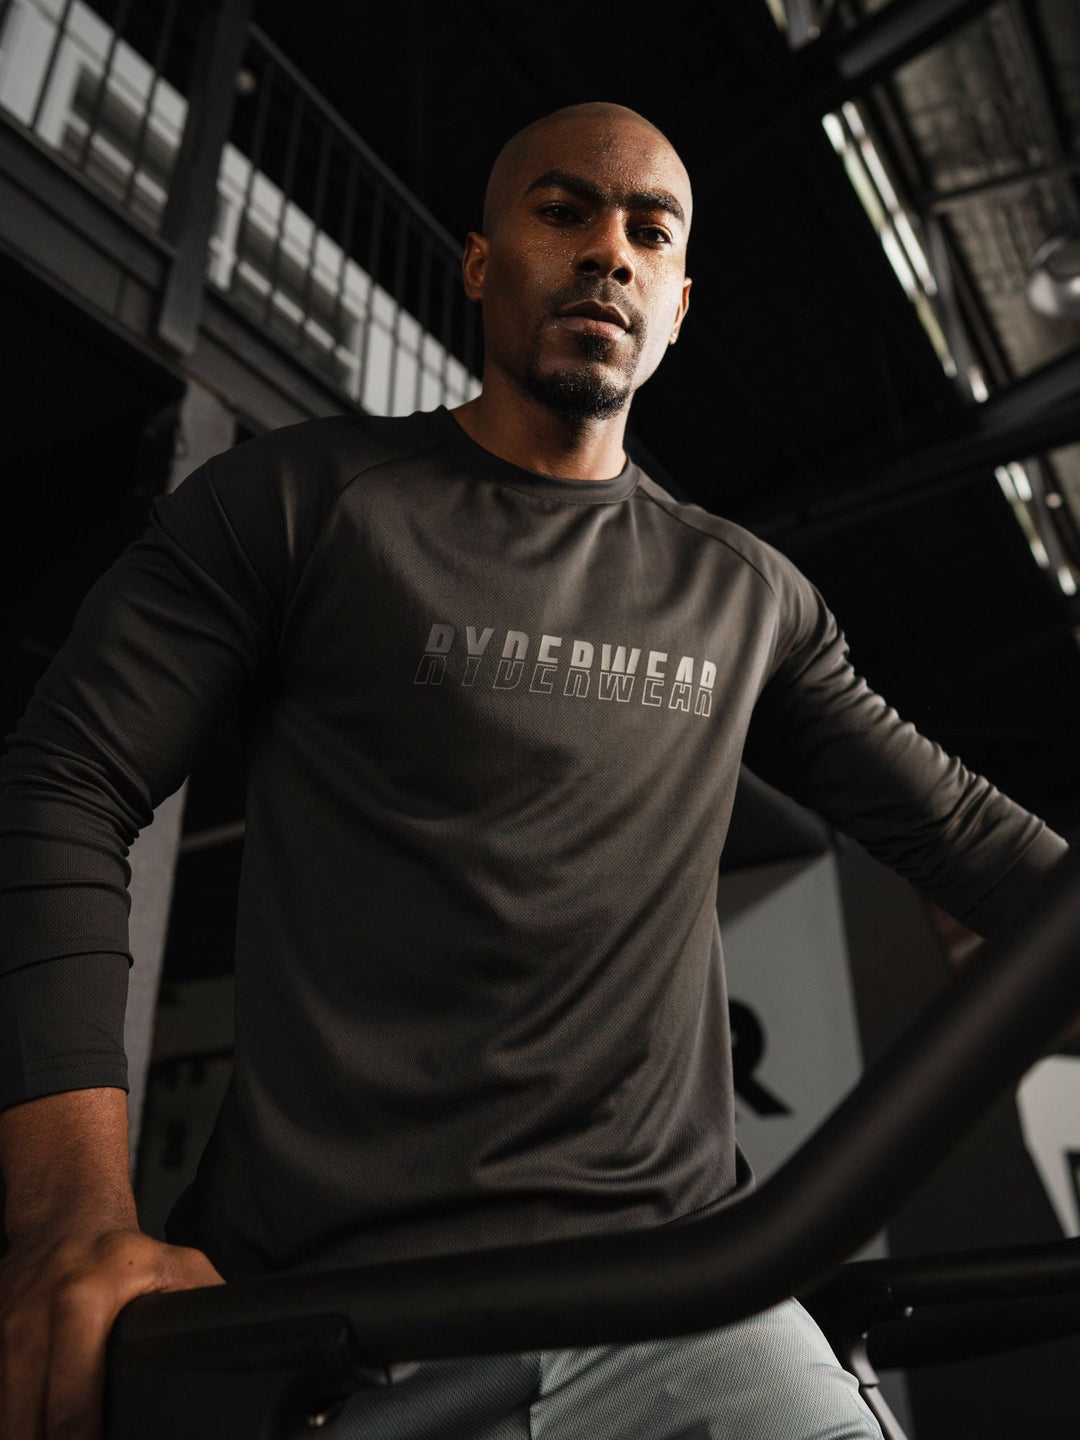 Overdrive Long Sleeve Top - Black Clothing Ryderwear 